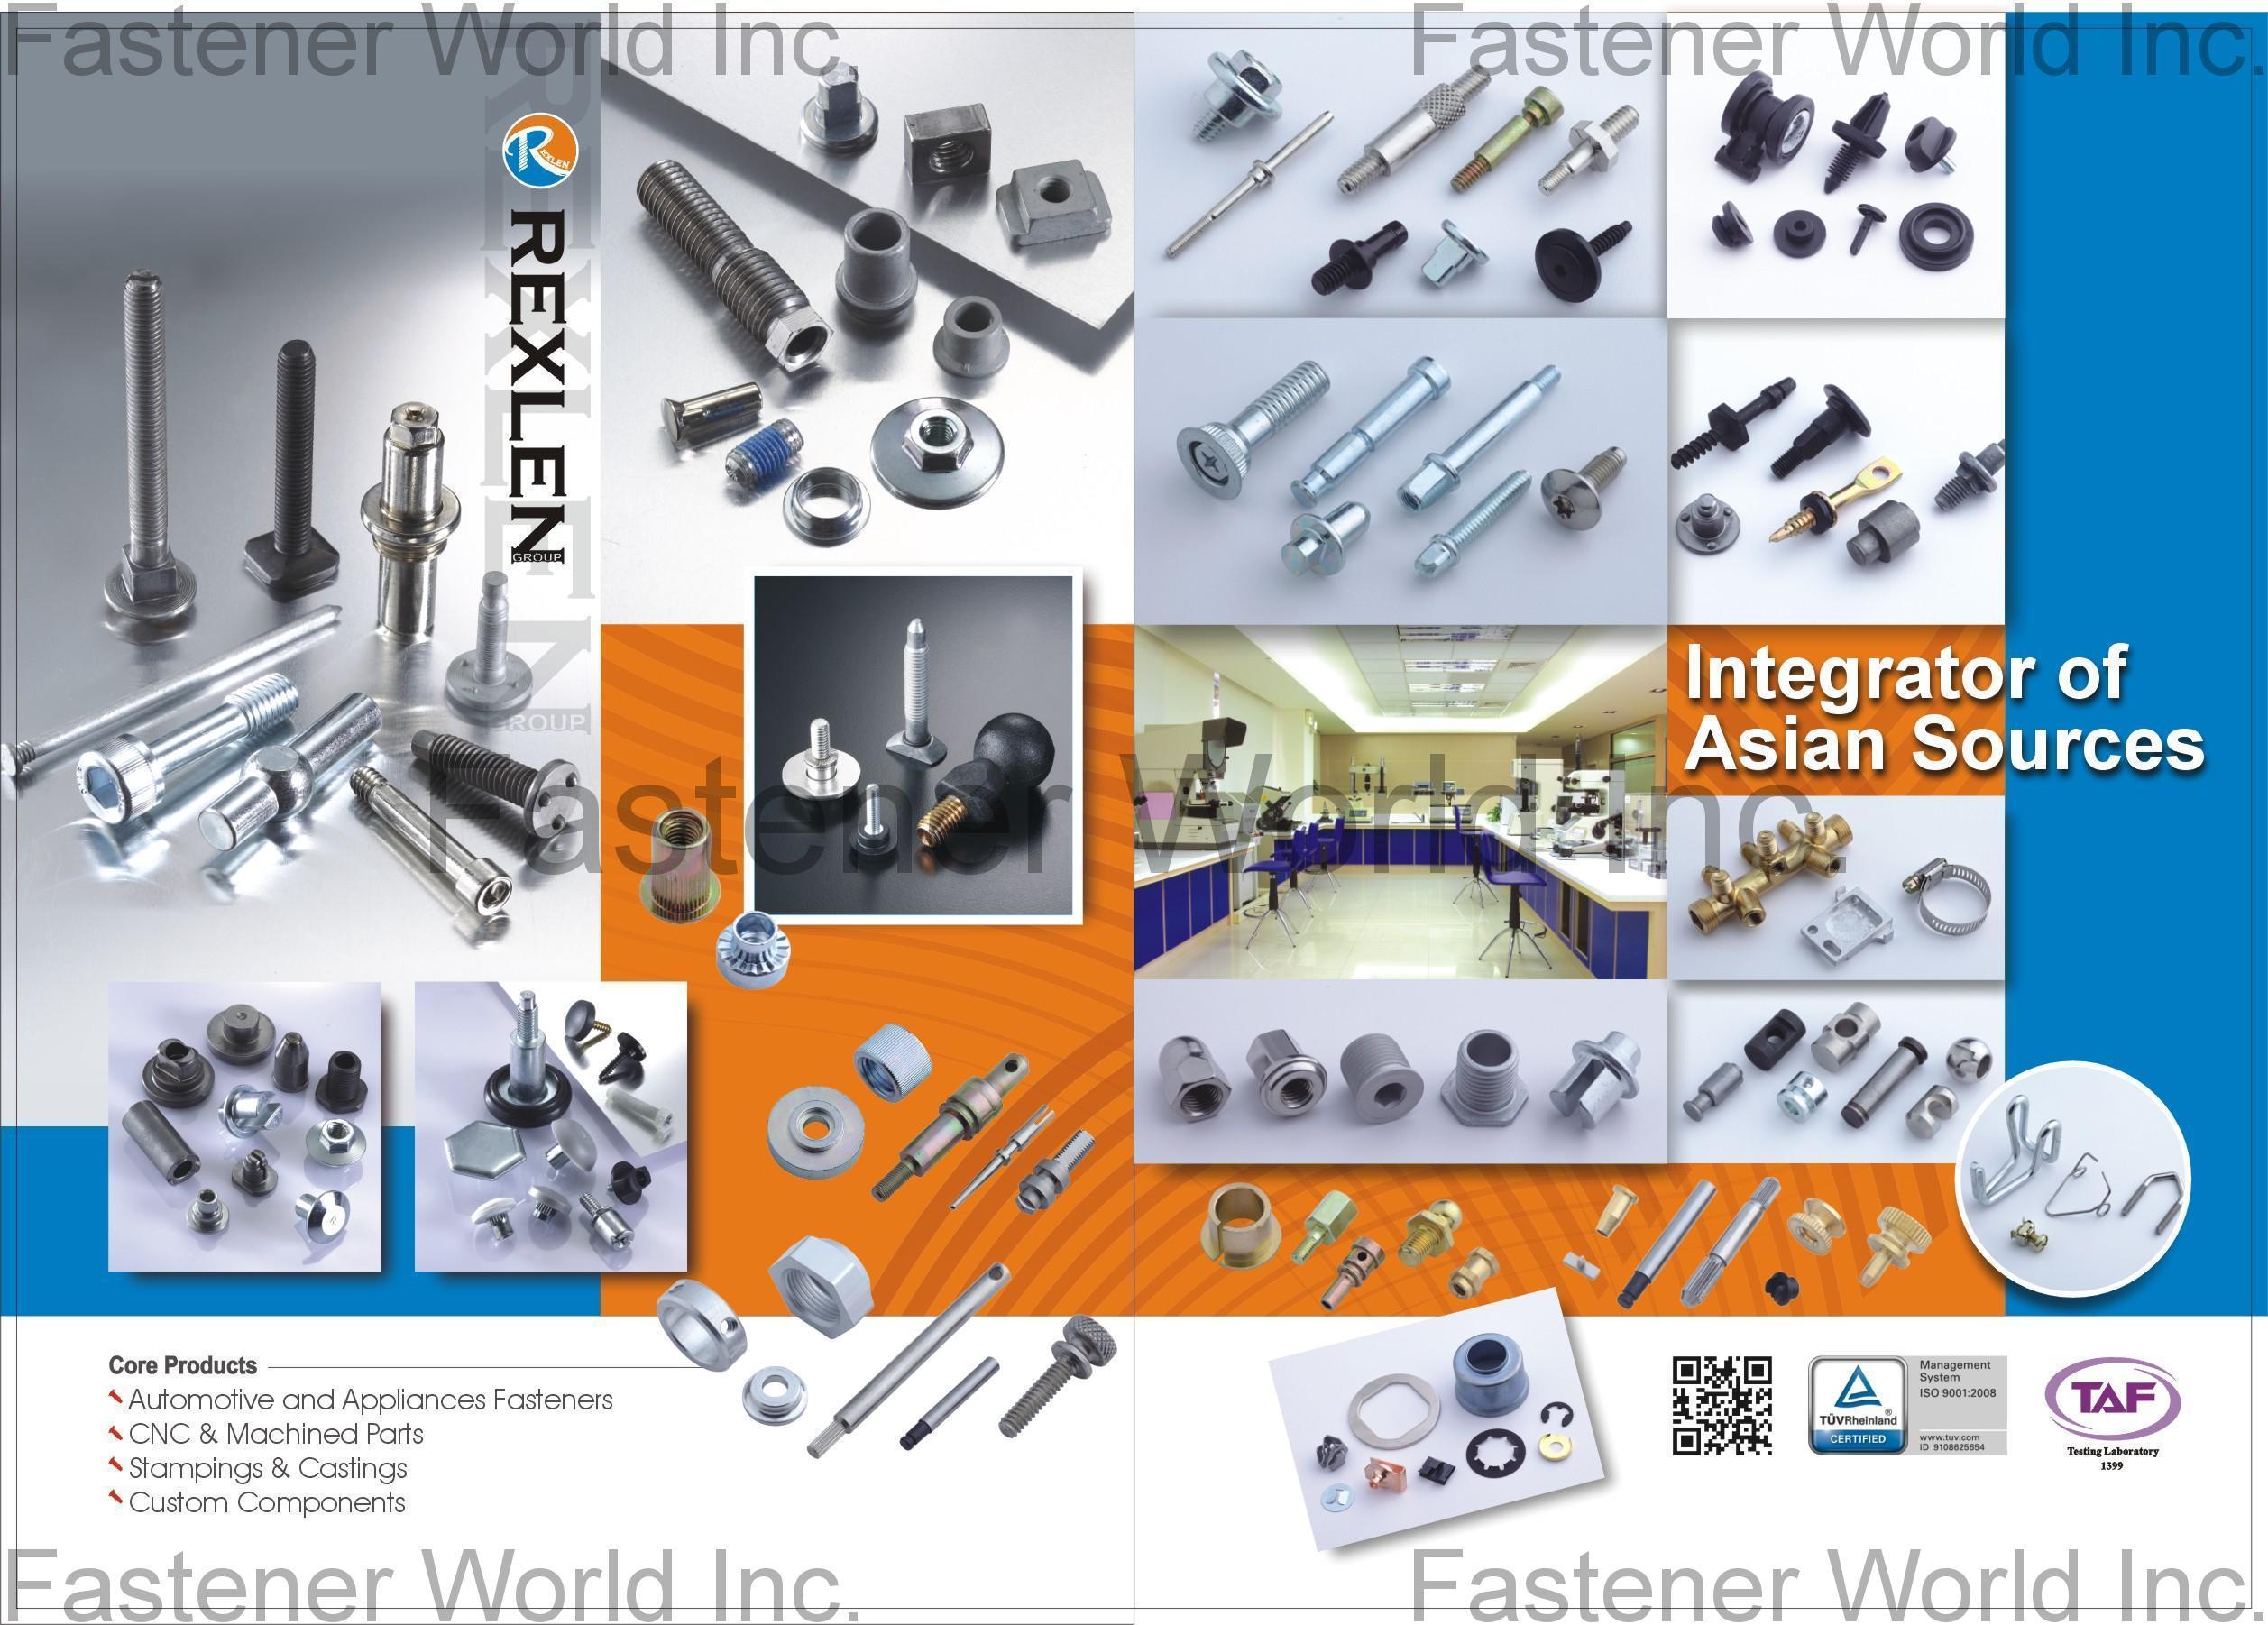 Automotive Parts Automotive and Appliances Fasteners, CNC & Machined Parts, Stampings & Castings, Custom Components